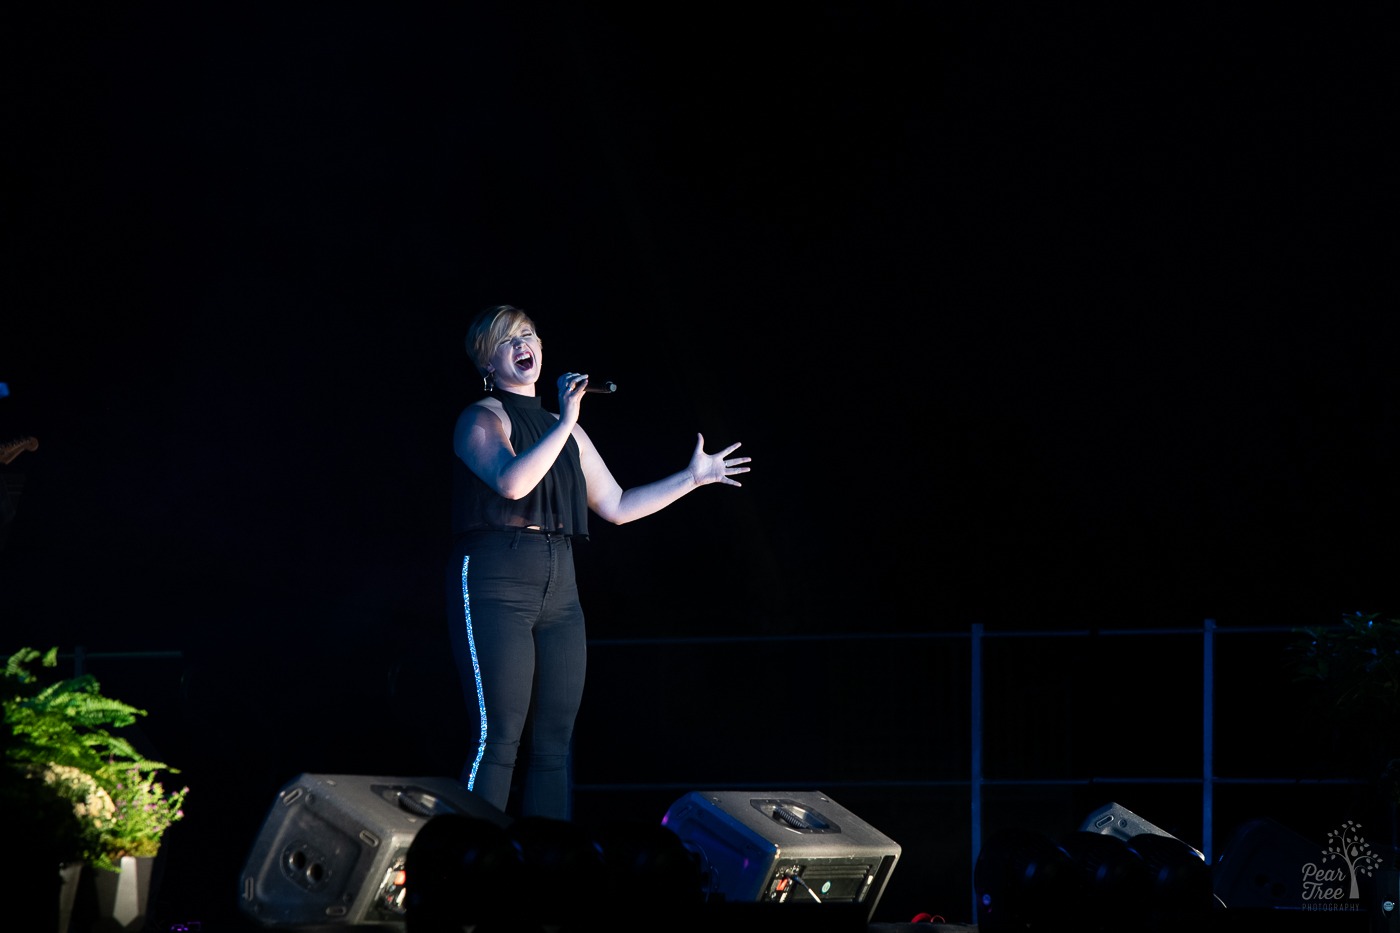 Broadway performer singing on stage with microphone pulling back from her mouth in one hand and her other hand outstretched